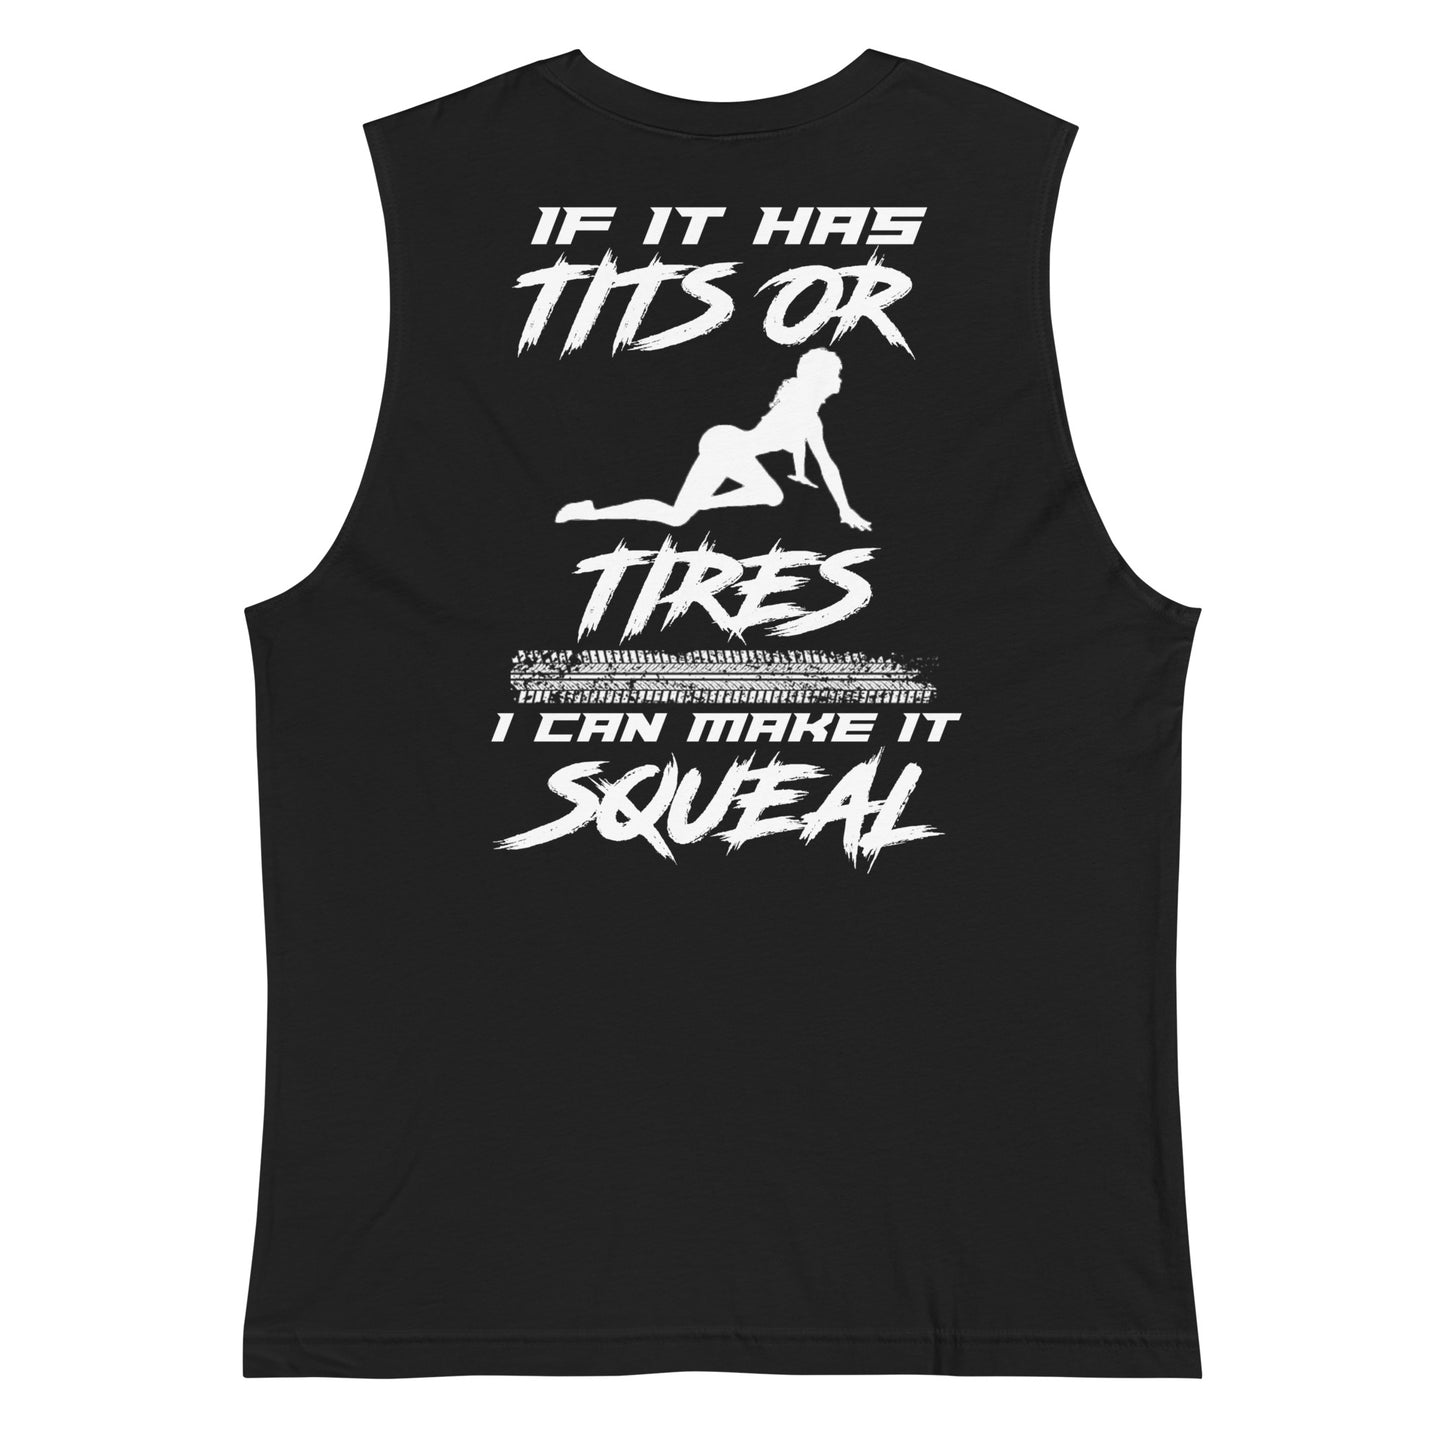 Tits Or Tires Muscle Shirt